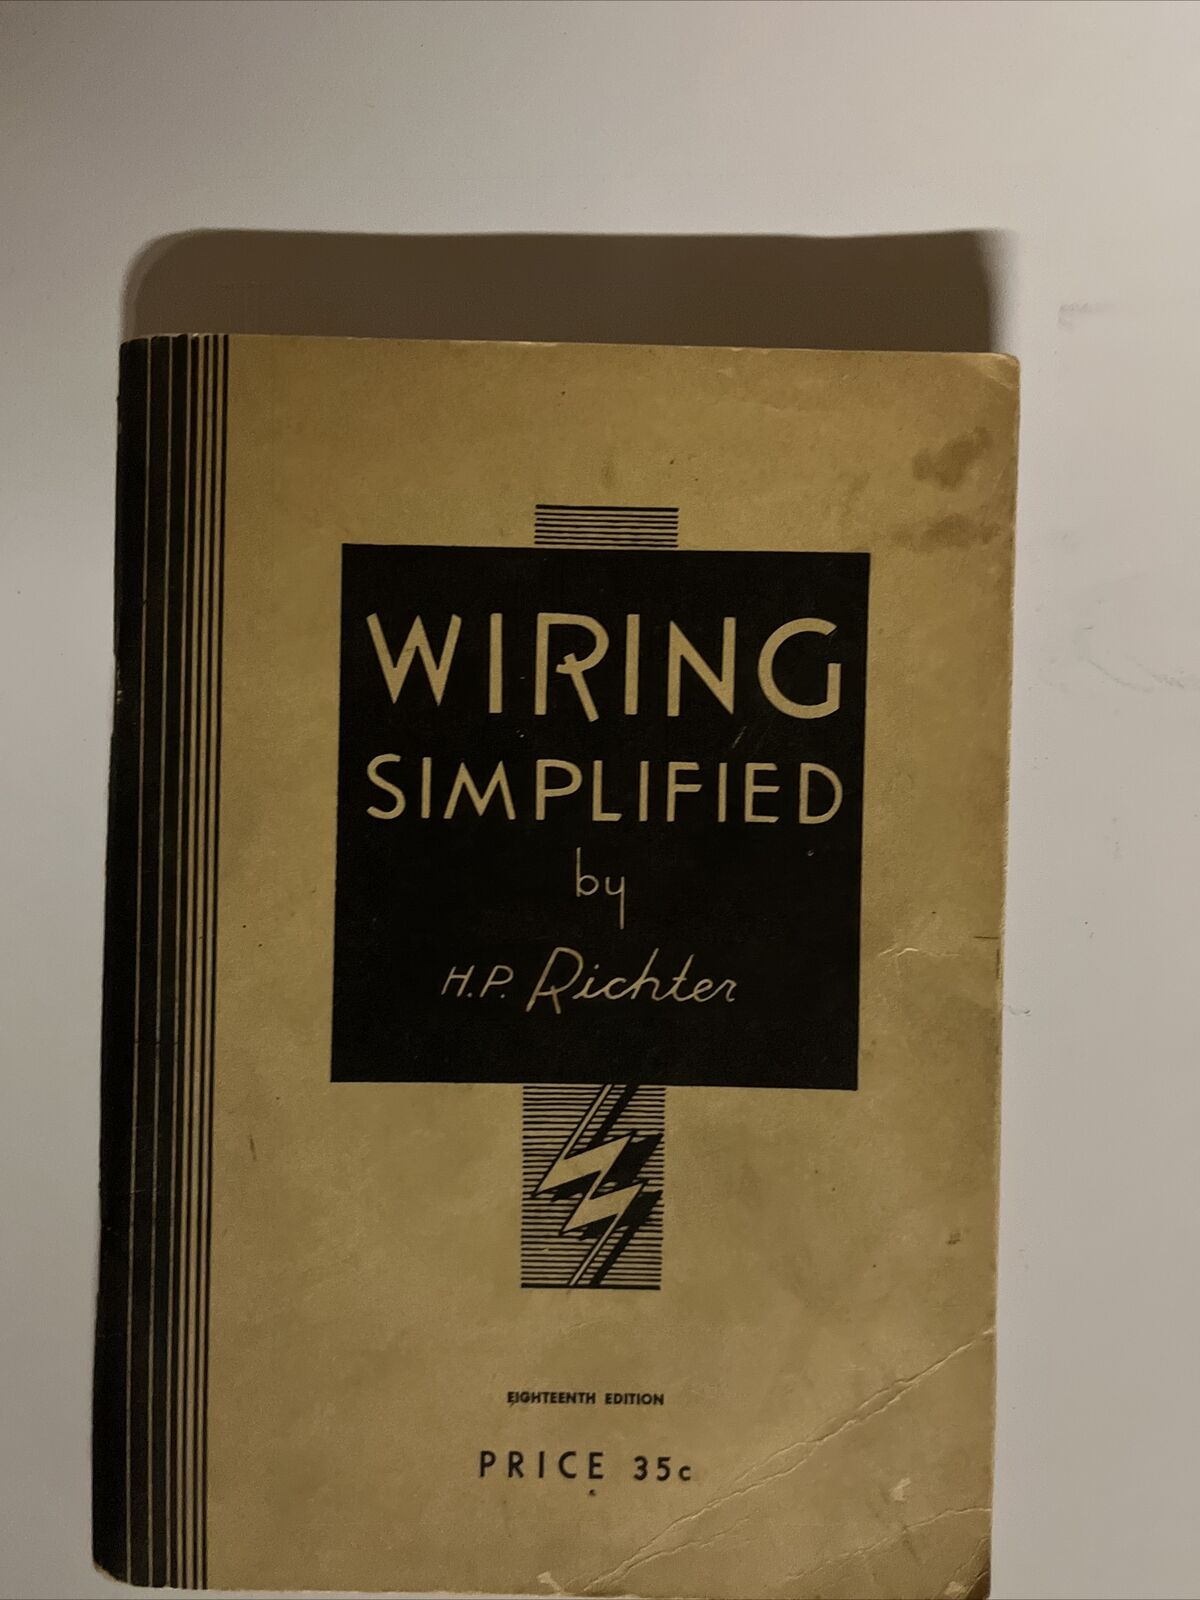 Vintage 1940s Electric Guide Booklet Wiring Simplified By H.P. Richter Good Copy